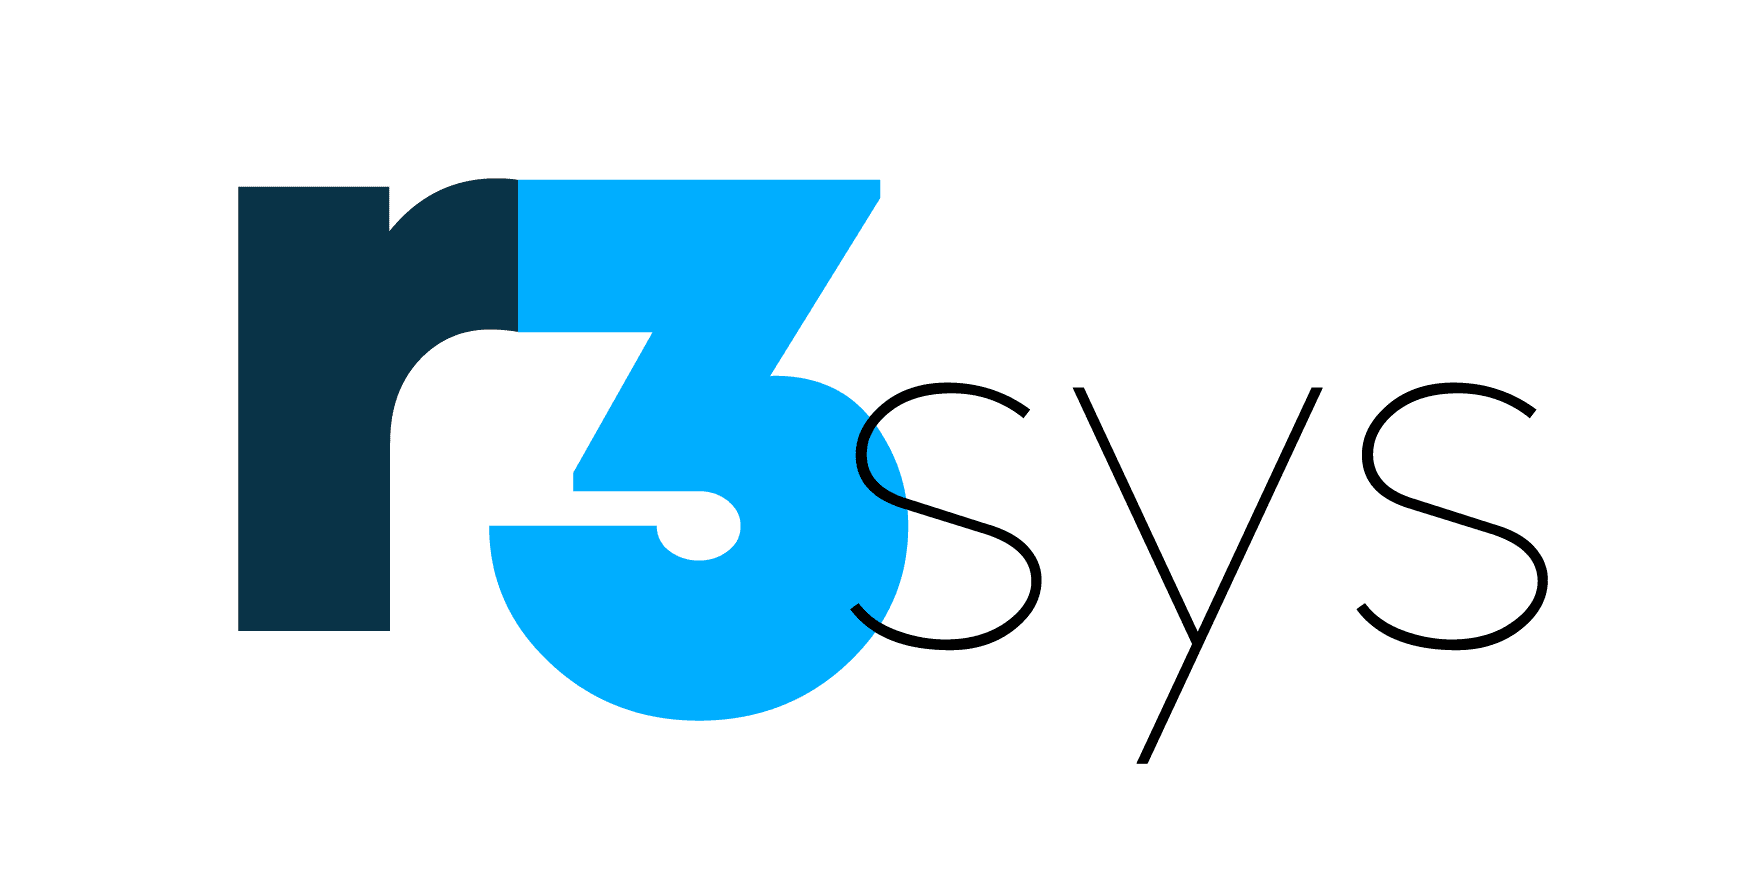 R3SYS